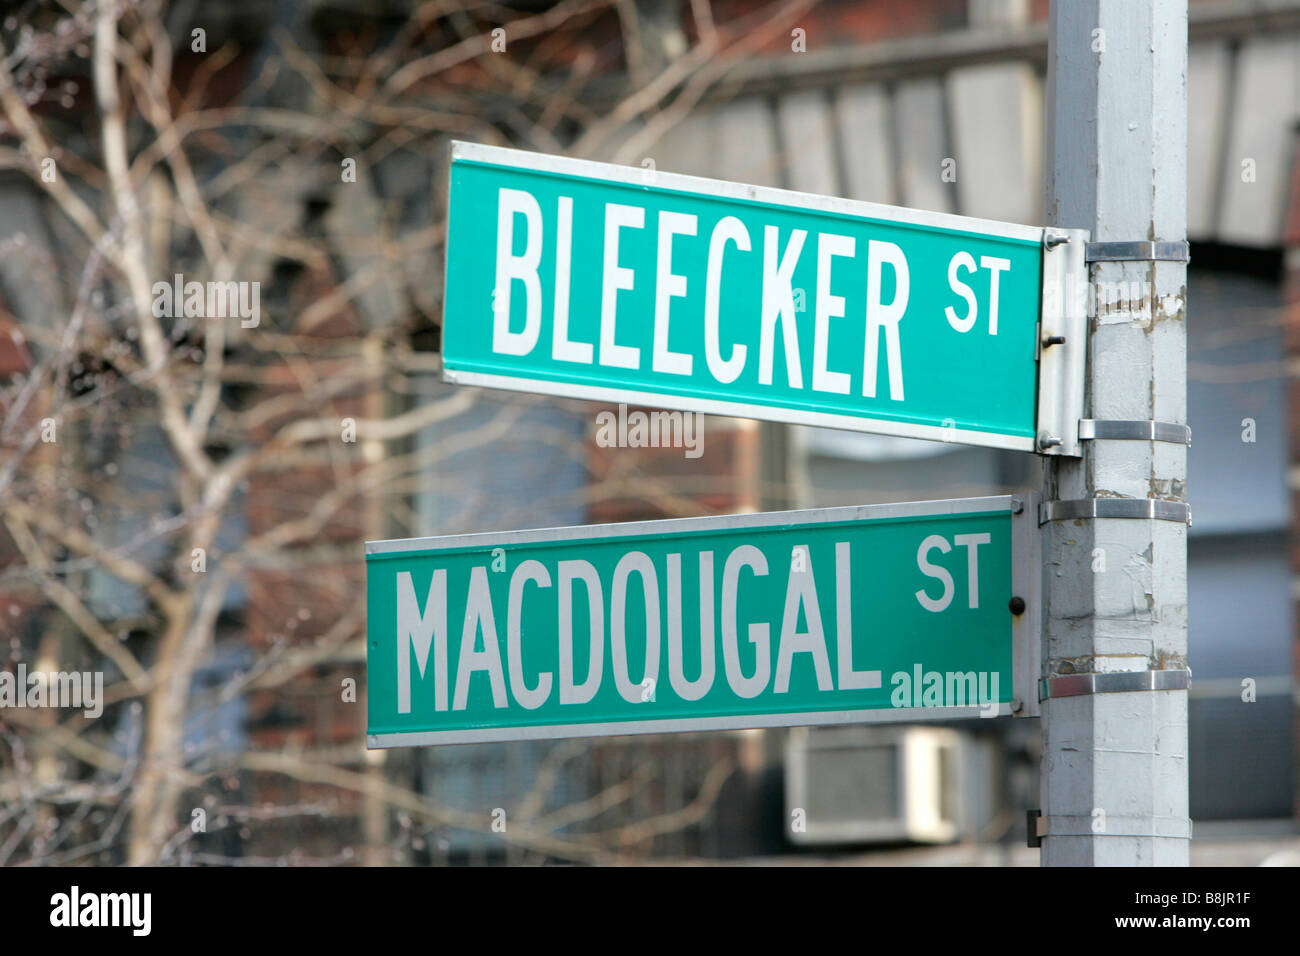 street signs at junction of Bleeker st and Macdougal street greenwich village new york city new york USA Stock Photo